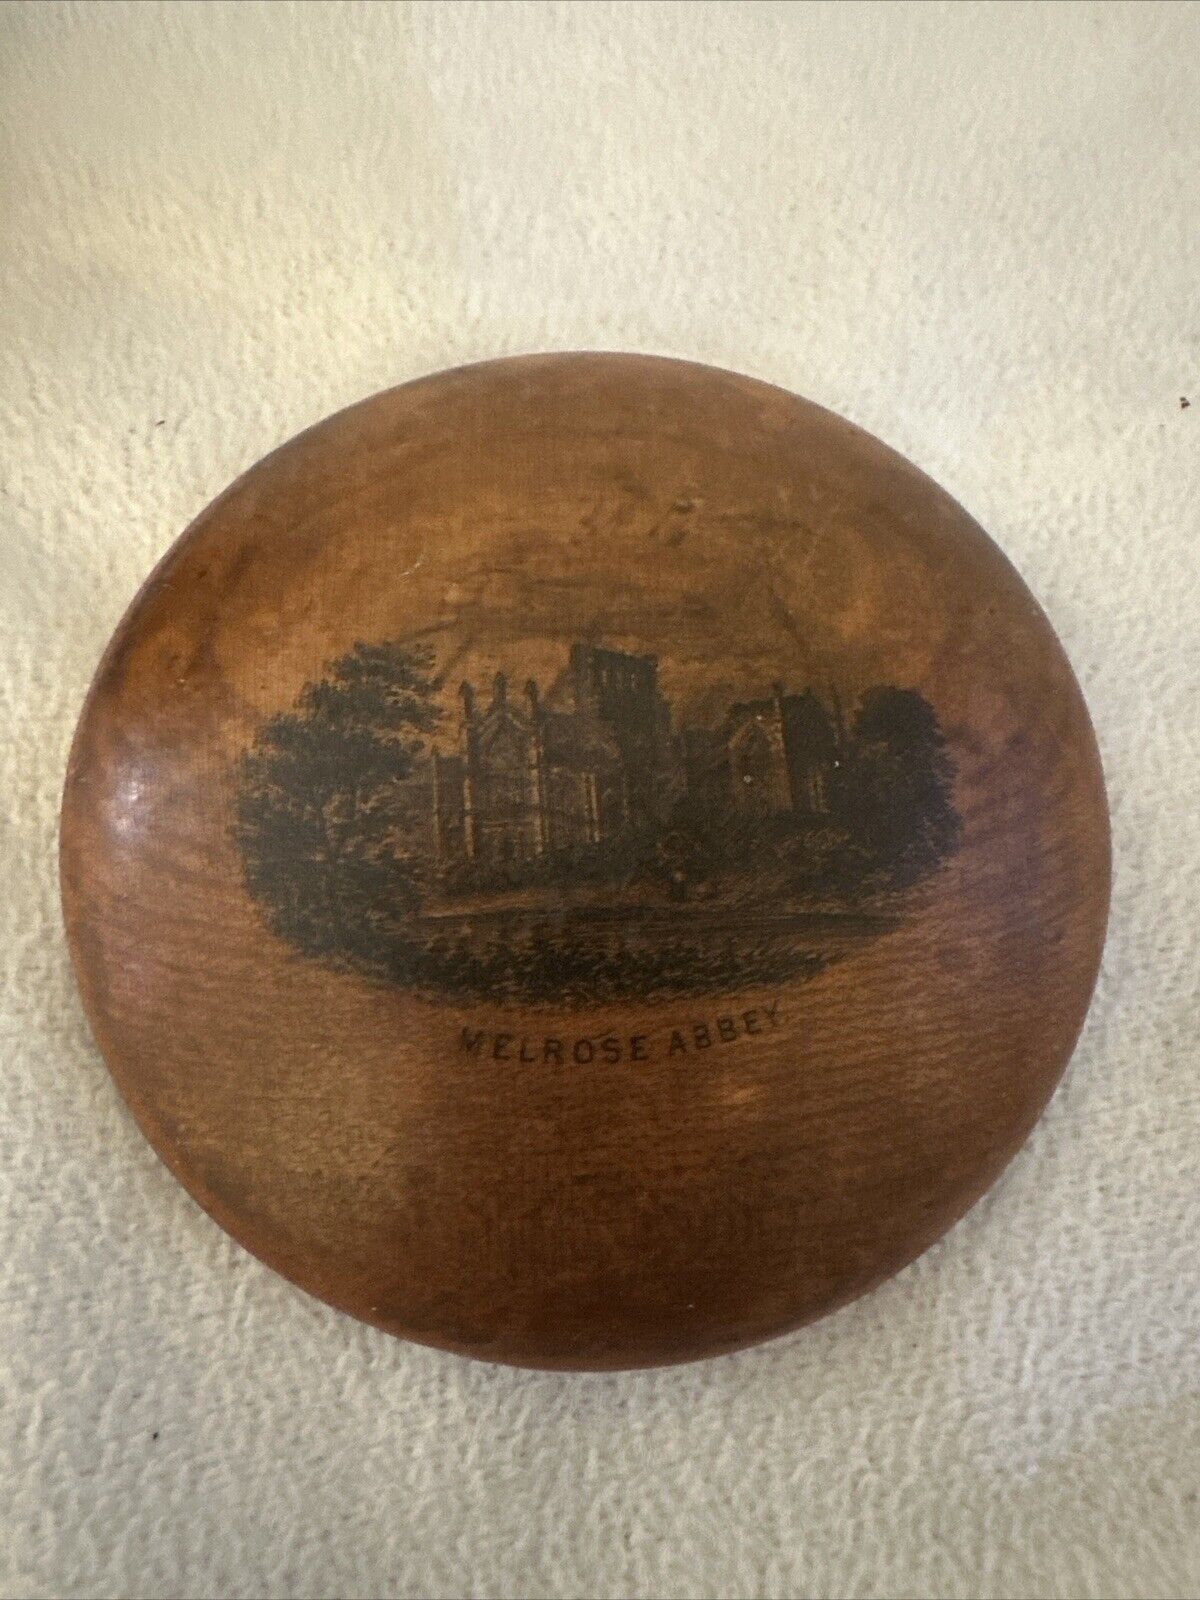 Antique Mauchline Ware Round Box Featuring the Melrose Abbey 3 X 3 Inch